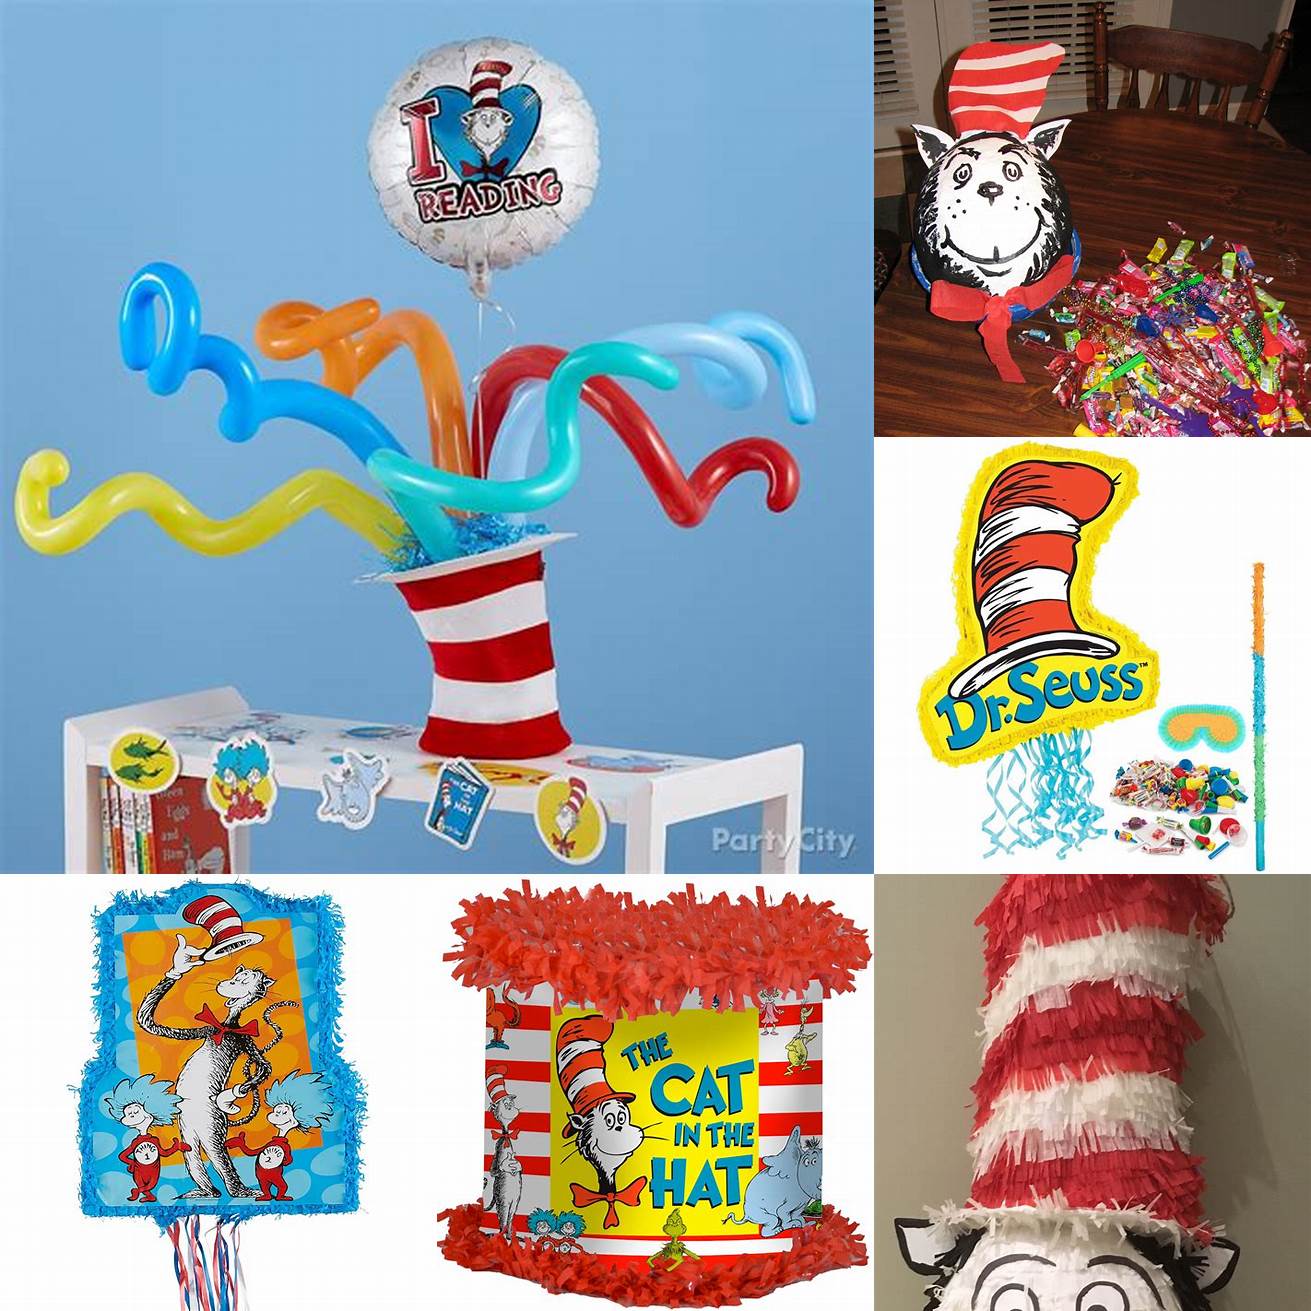 5 Cat in the Hat Pinata with balloons